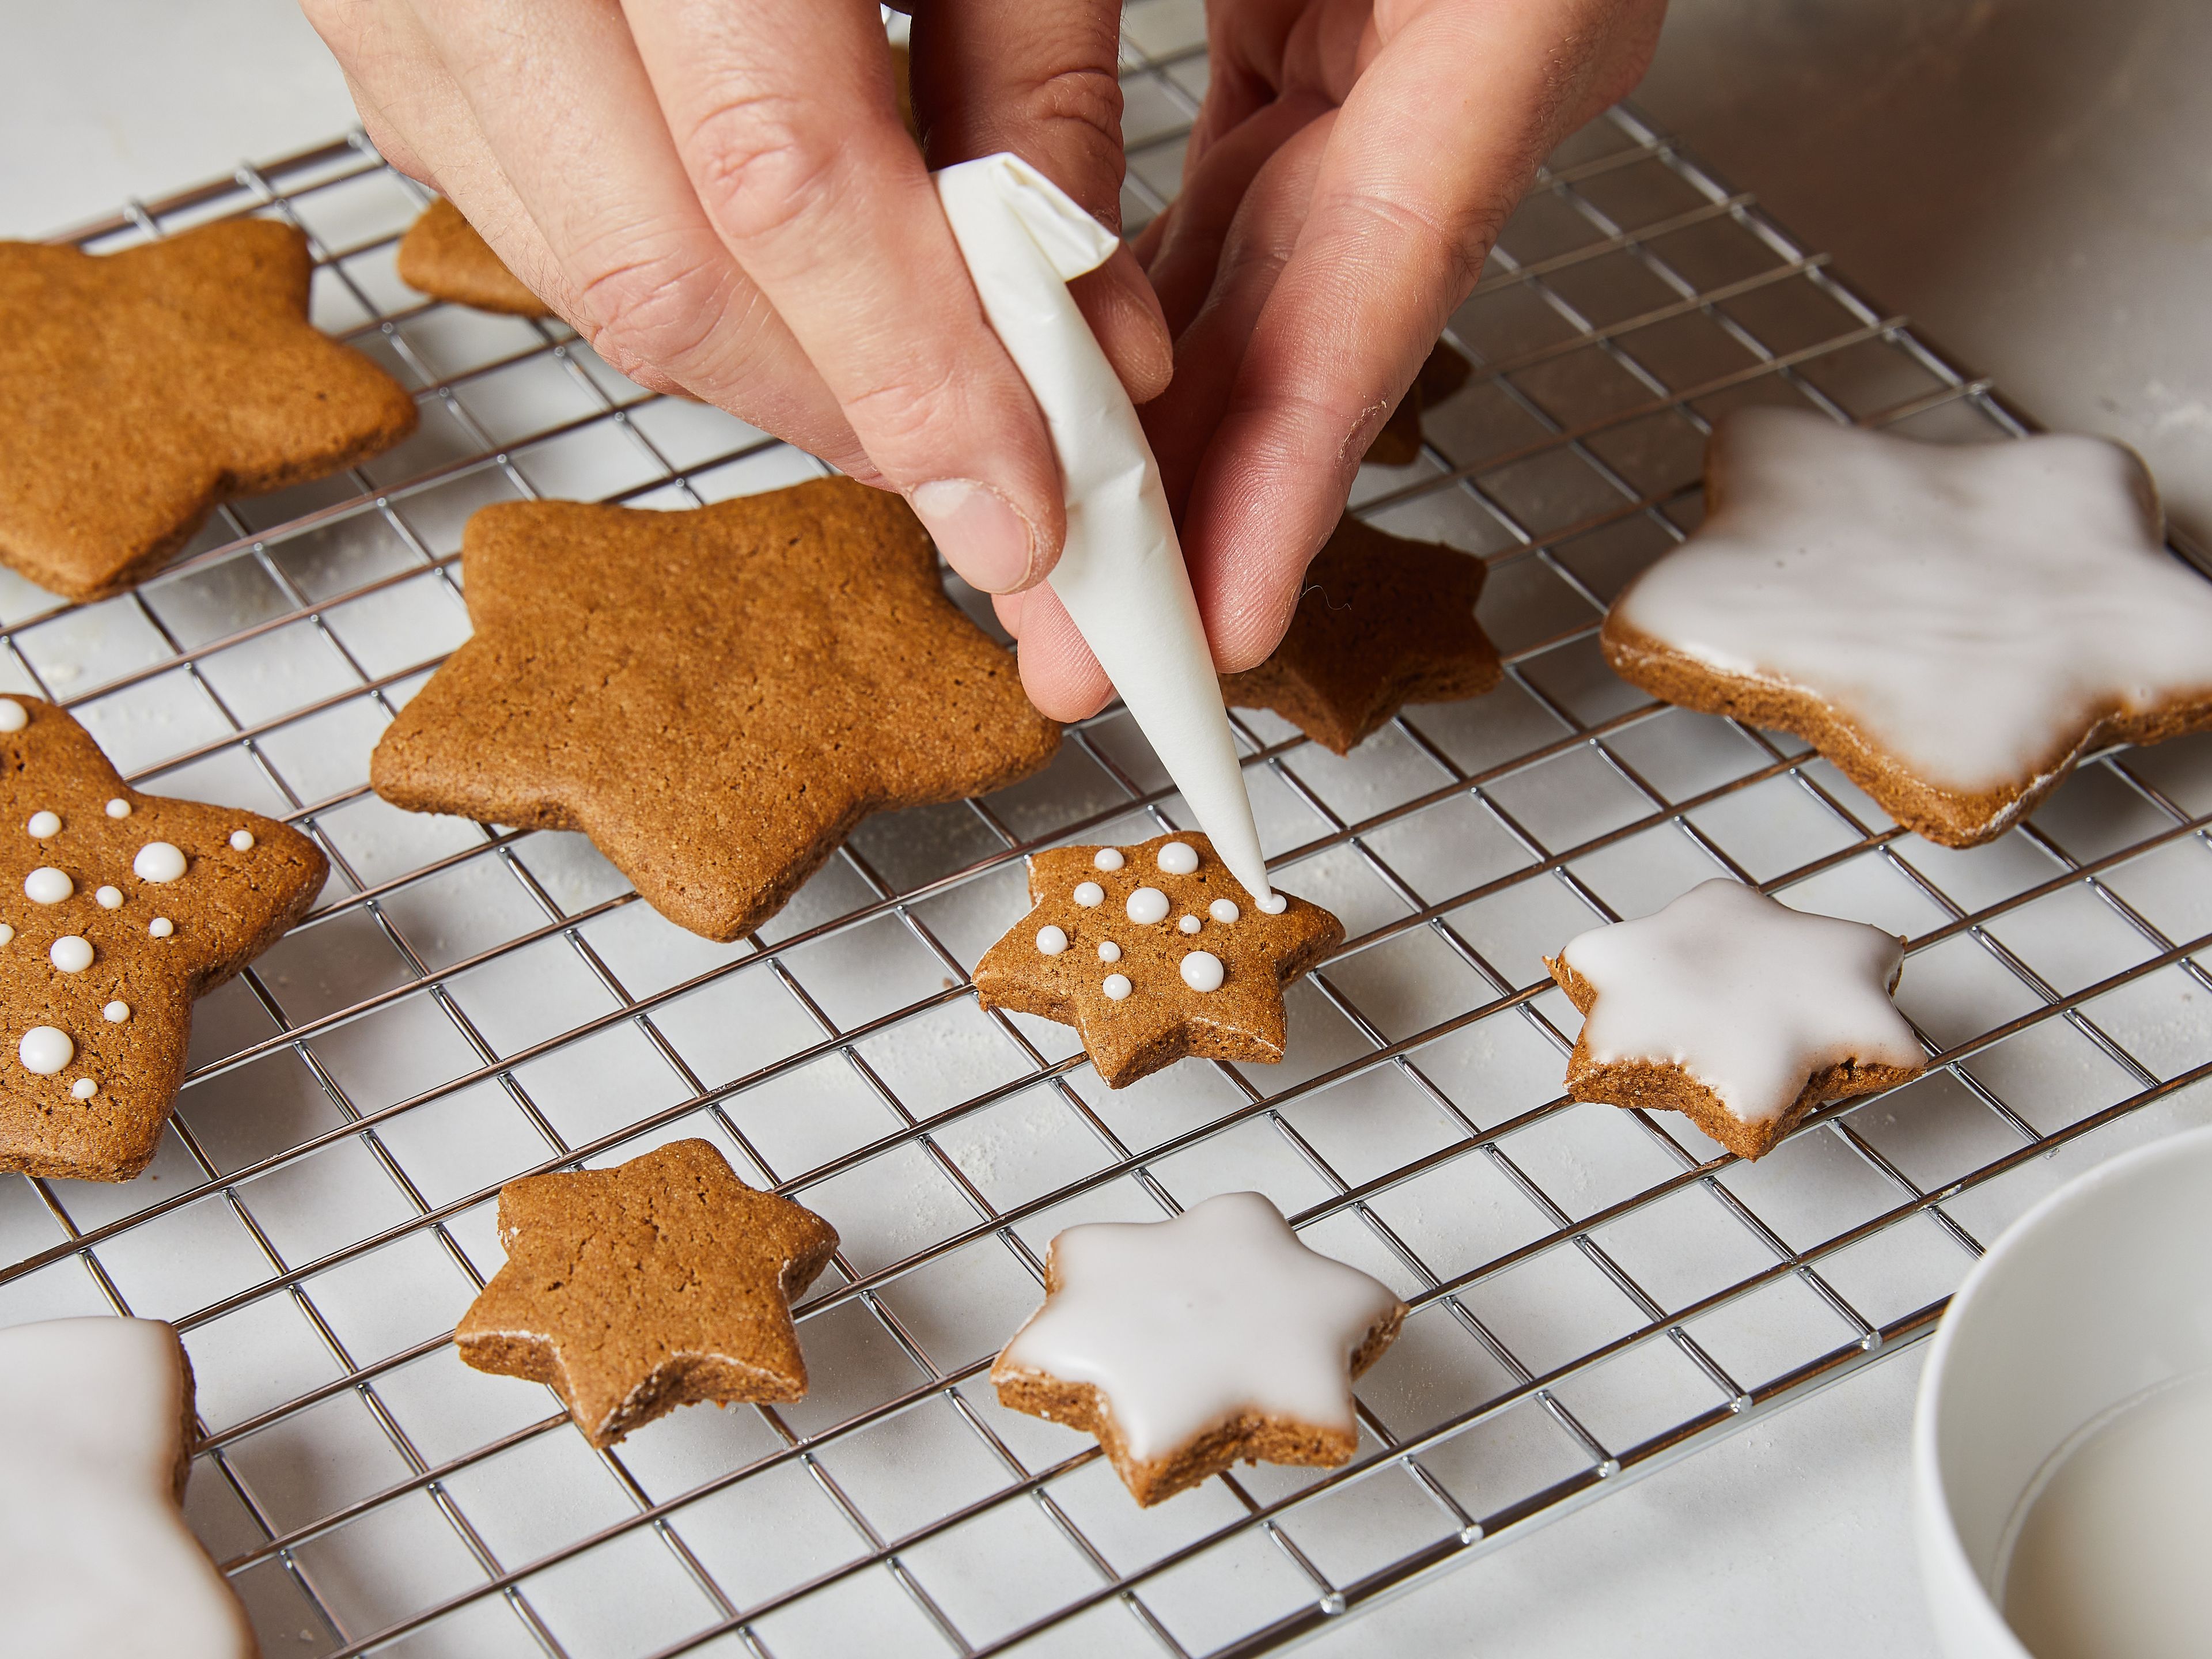 Bake the gingerbread cookies for approx. 8–10 min. Then let them cool on the rack for approx. 5 min. So they become firmer. Then let it cool down completely. Decorate as you like.